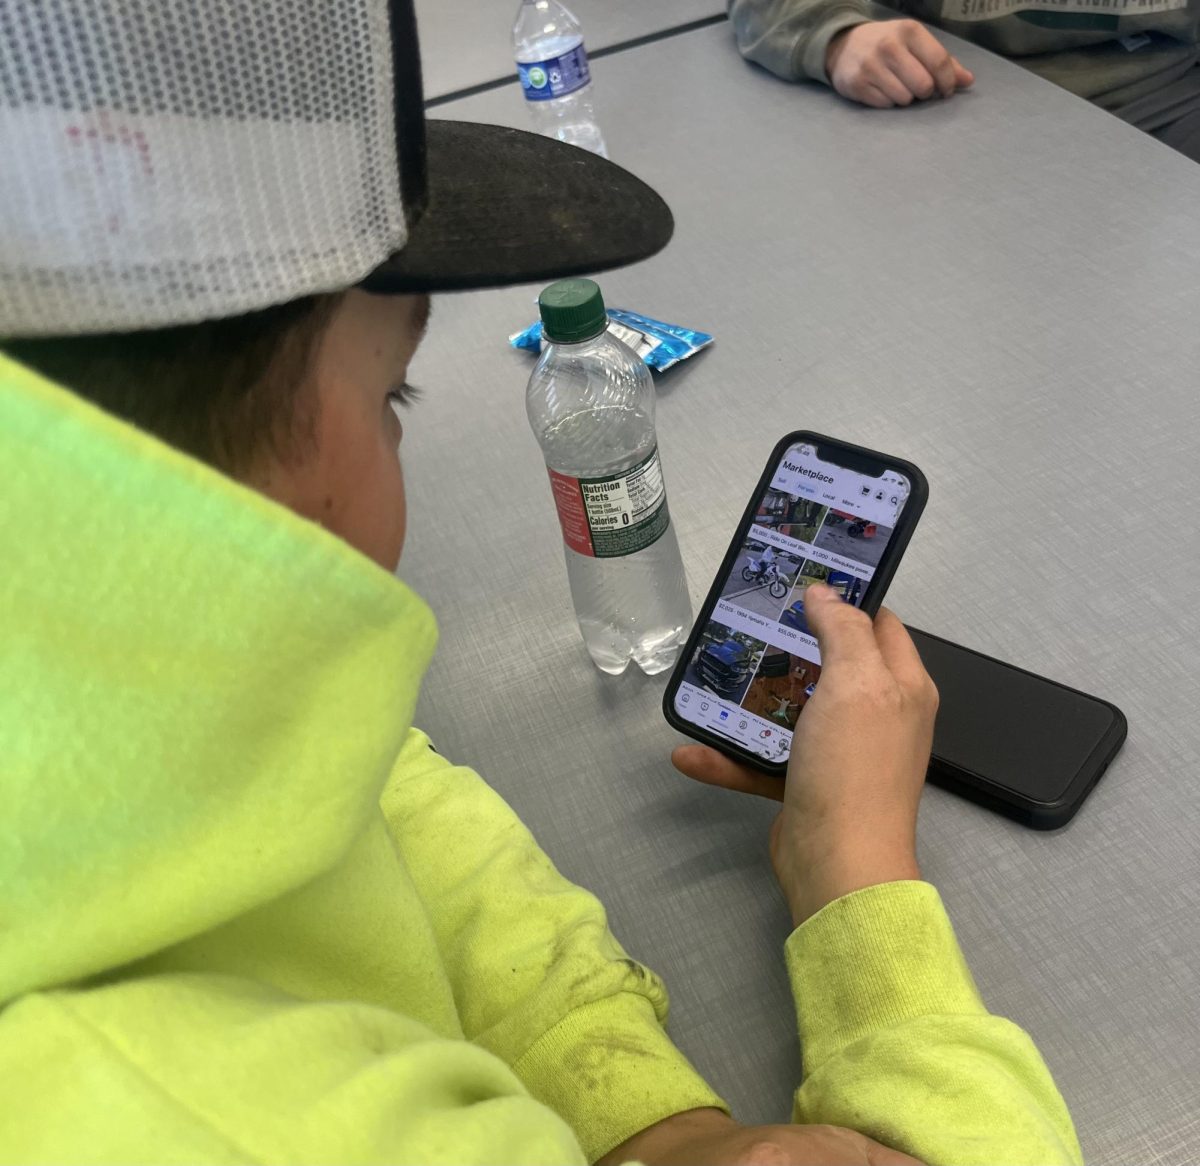 Junior Nicholas Mancini using his lunch period at Nonnewaug to scan through Facebook Marketplace, the typical buying platform for most students, as he looks for a truck to buy. Most students will make their first big purchase from browsing through this platform.
